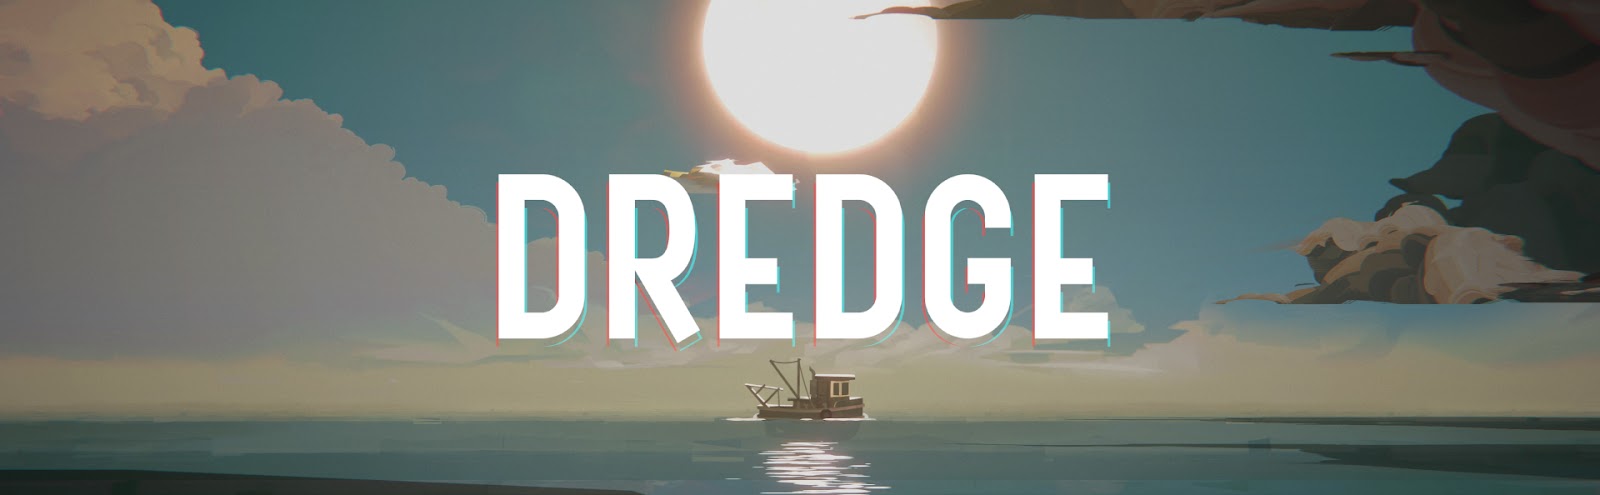 Image shows a small fishing boat on still ocean. The sun is low in the sky and directly in the centre of the image. To the left, white clouds and darker, grey clouds are to the right. In the centre of the image the word "Dredge" is shown in a sans serif font.